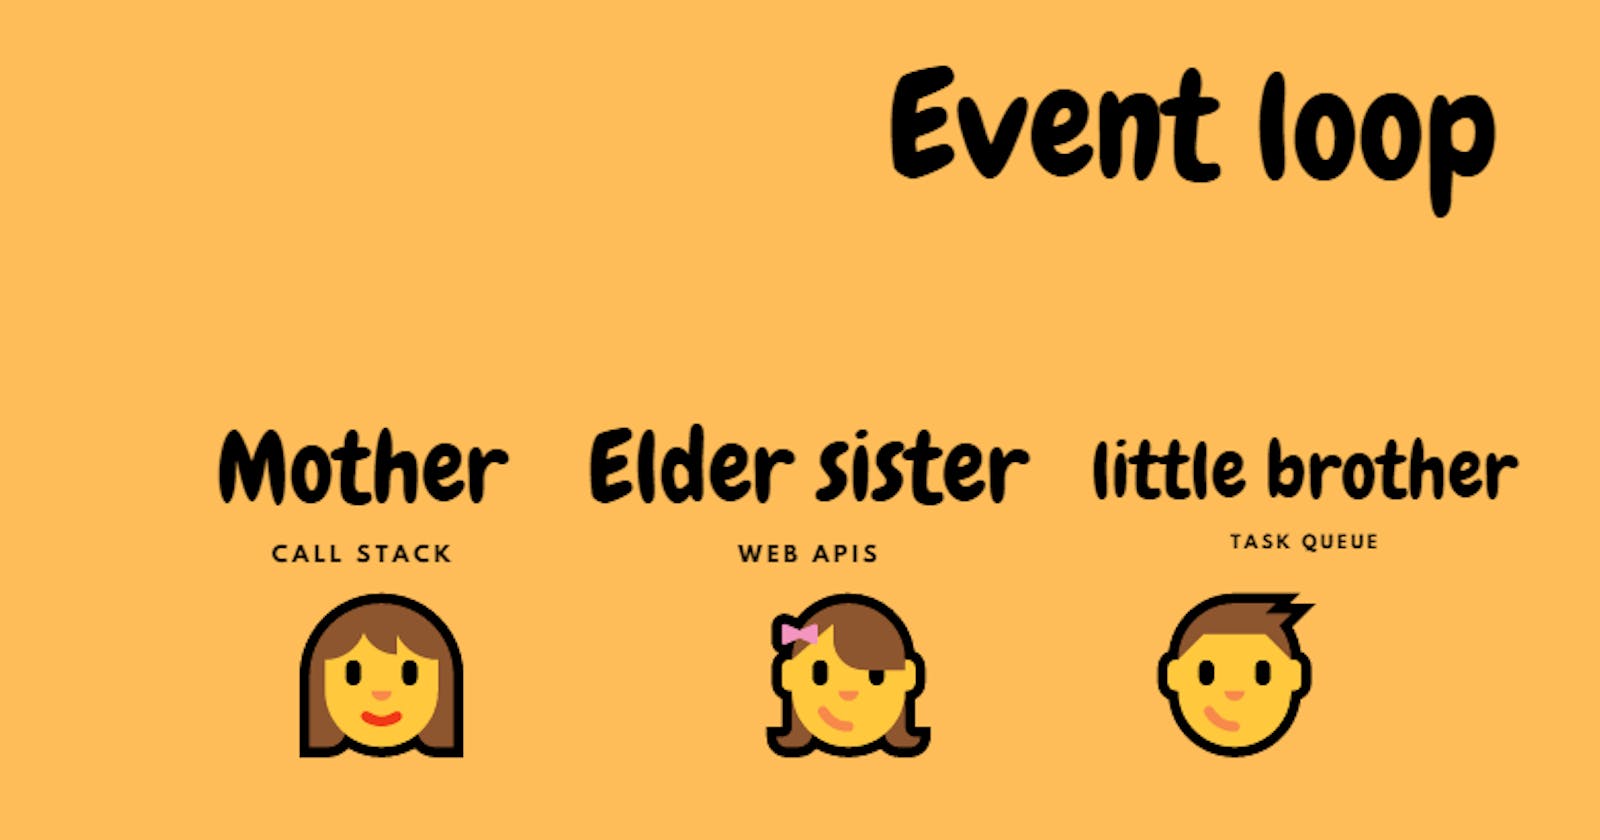 The story of a mother, elder sister and little brother . (event loop)